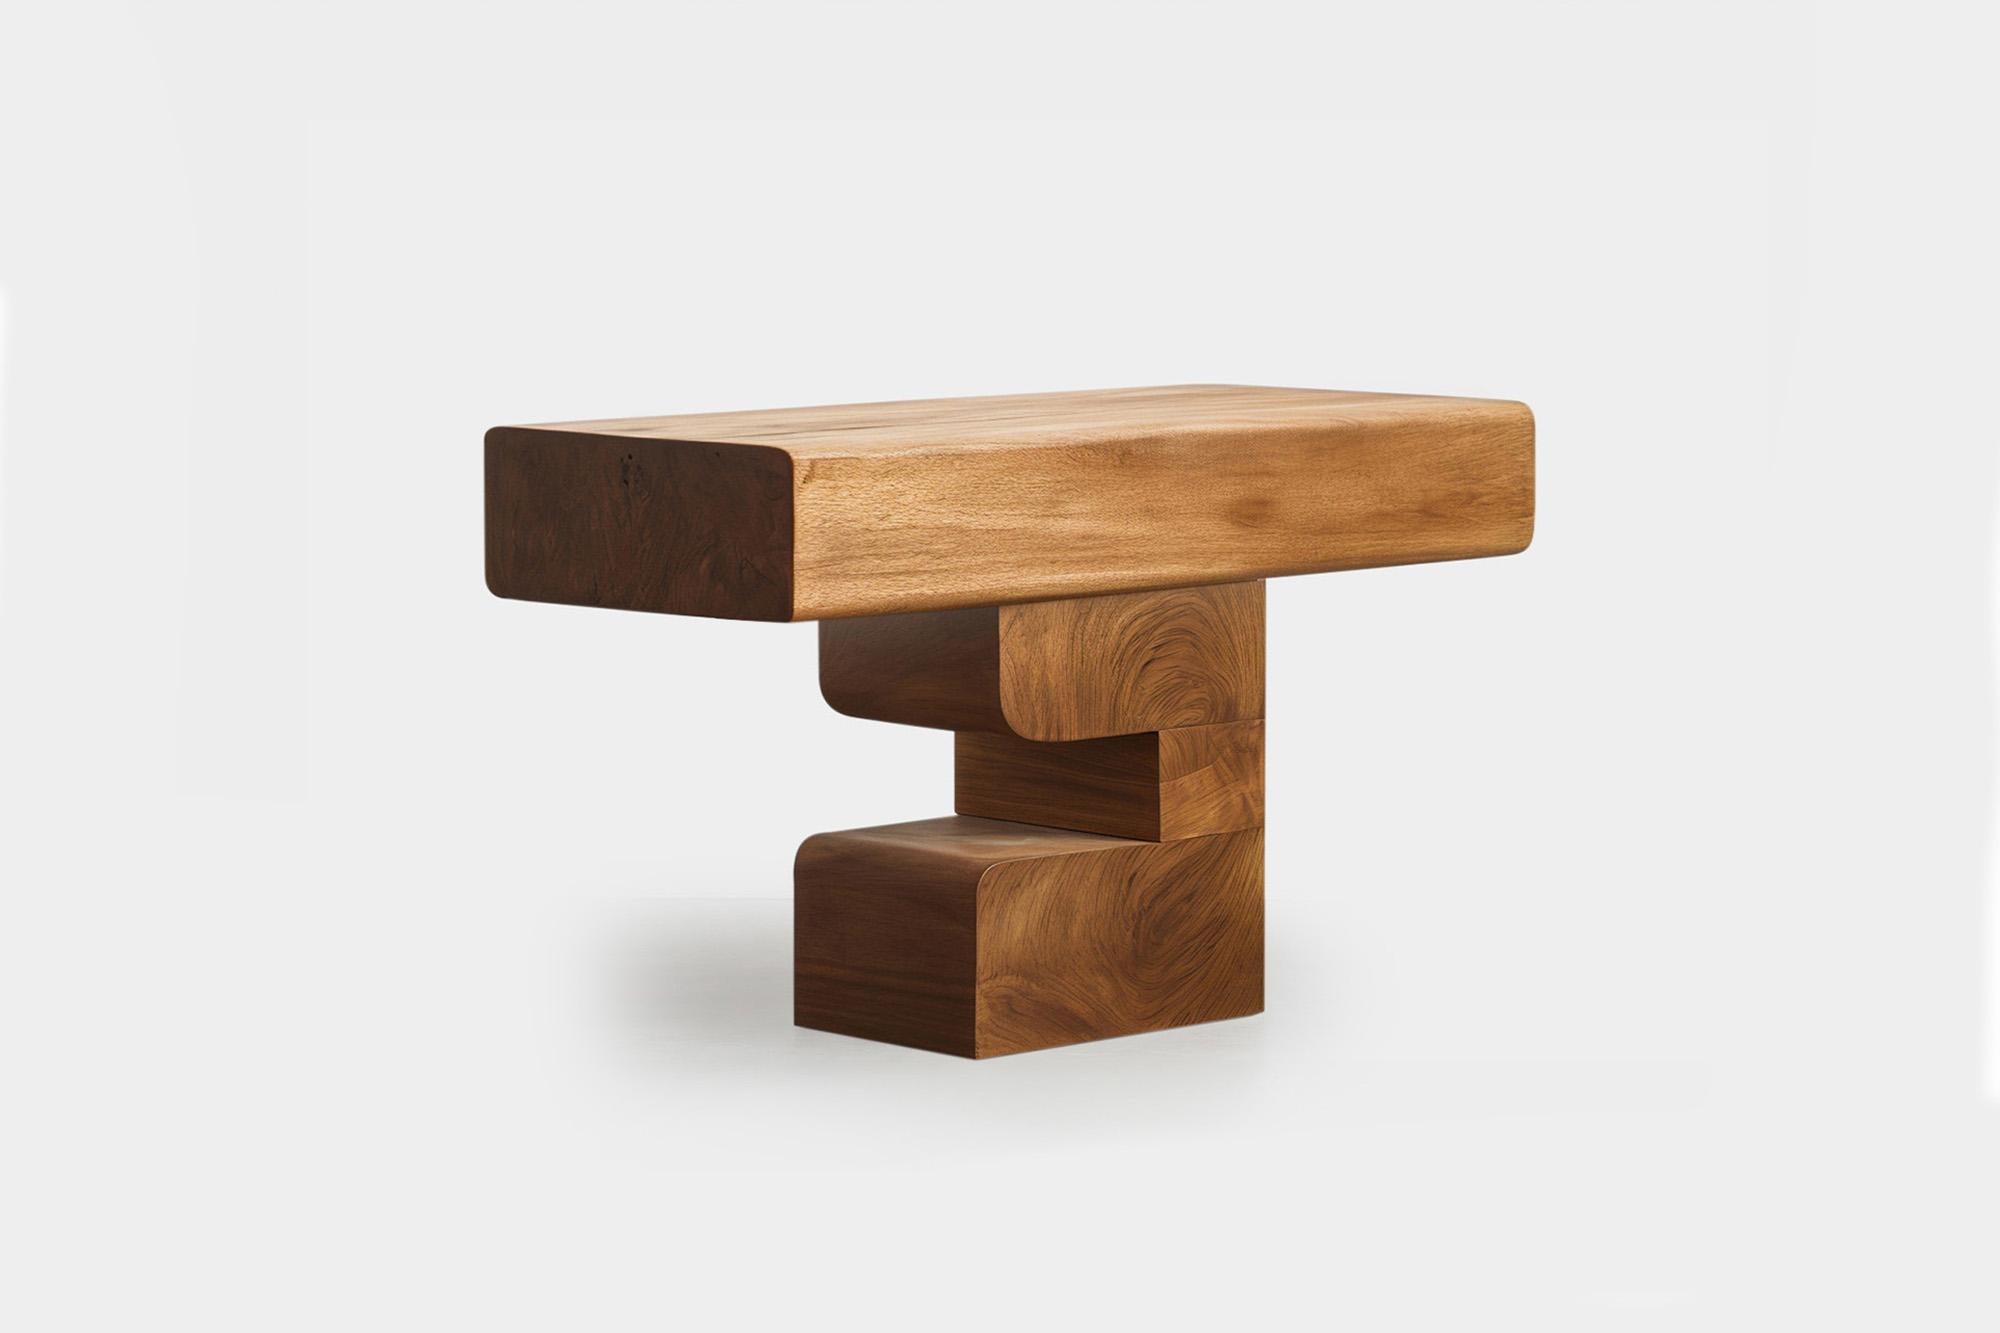 Elefante Oak Console 06 by NONO, Bold Texture, Sleek Edge—————————————————————
Elefante Collection: A Harmony of Design and Heritage by NONO

Crafting Elegance with a Modernist Touch

NONO, renowned for its decade-long journey in redefining everyday